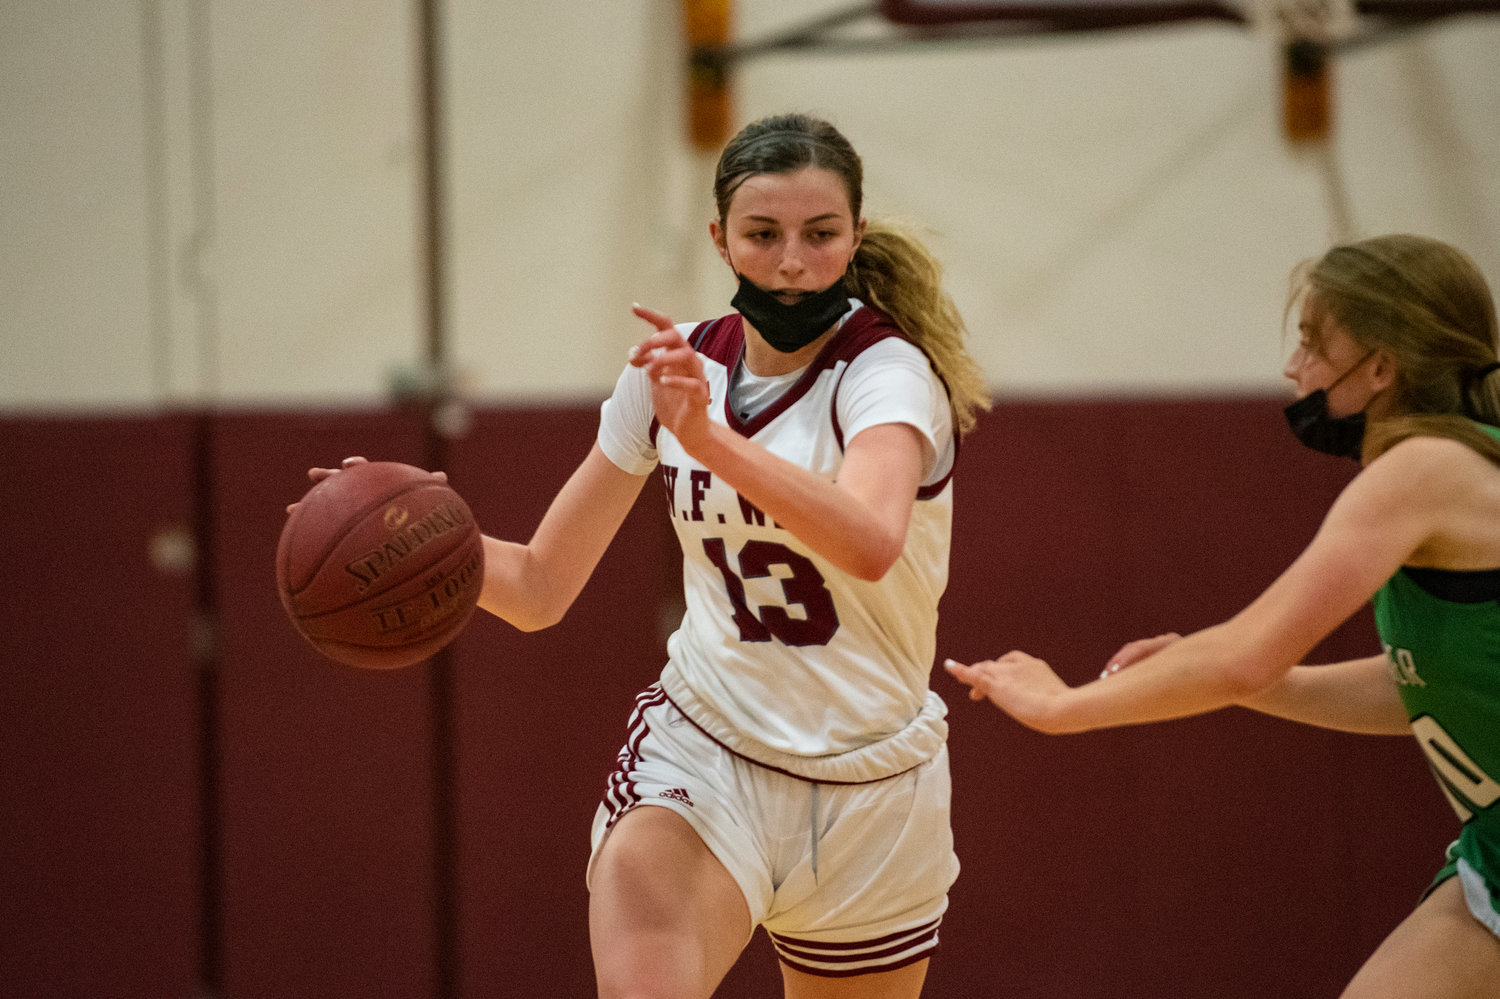 W.F. West’s Drea Brumfield (13) was named the 2A Evergreen Conference MVP for the 2021 season.